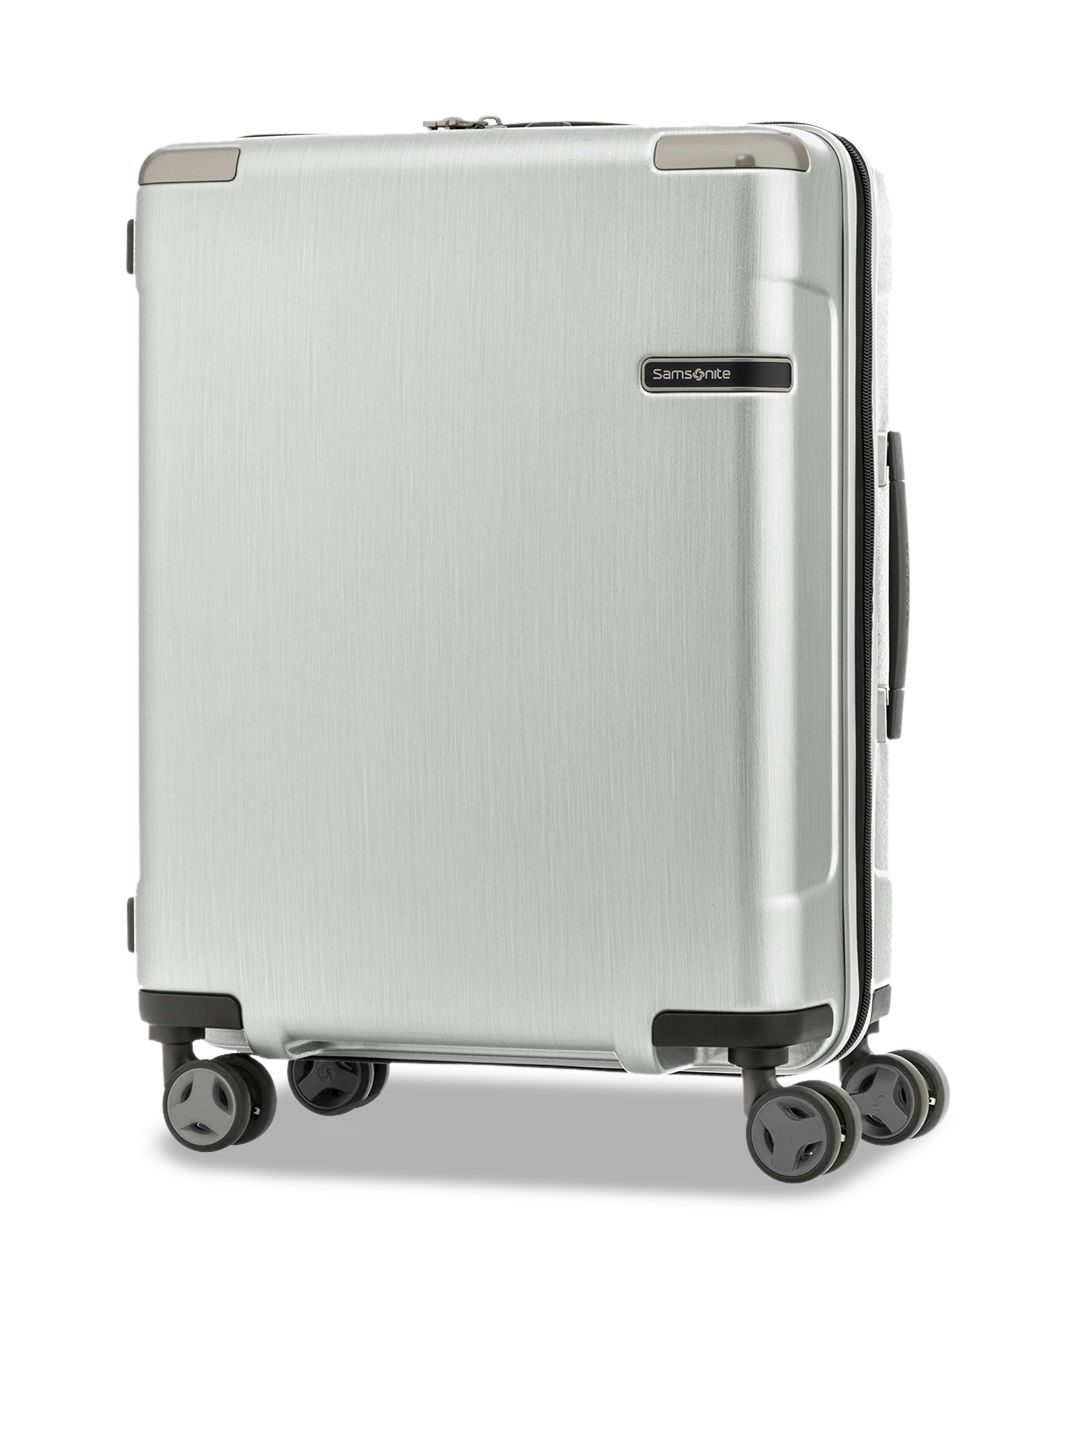 Samsonite Silver-Coloured Solid Hard Sided Cabin Trolley Suitcase Price in India